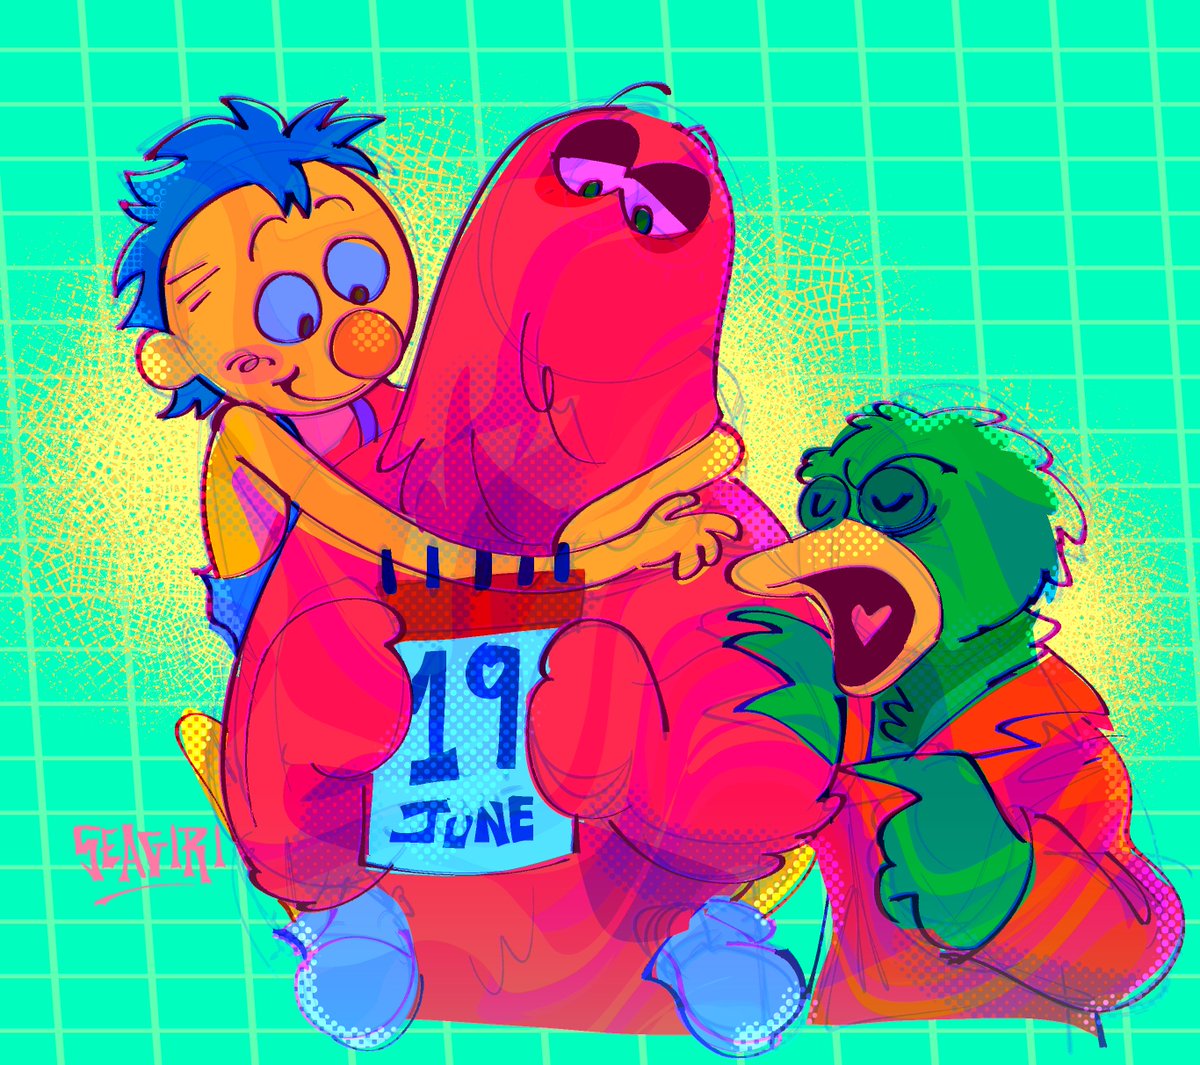 don't forget you're here forever

#dhmis